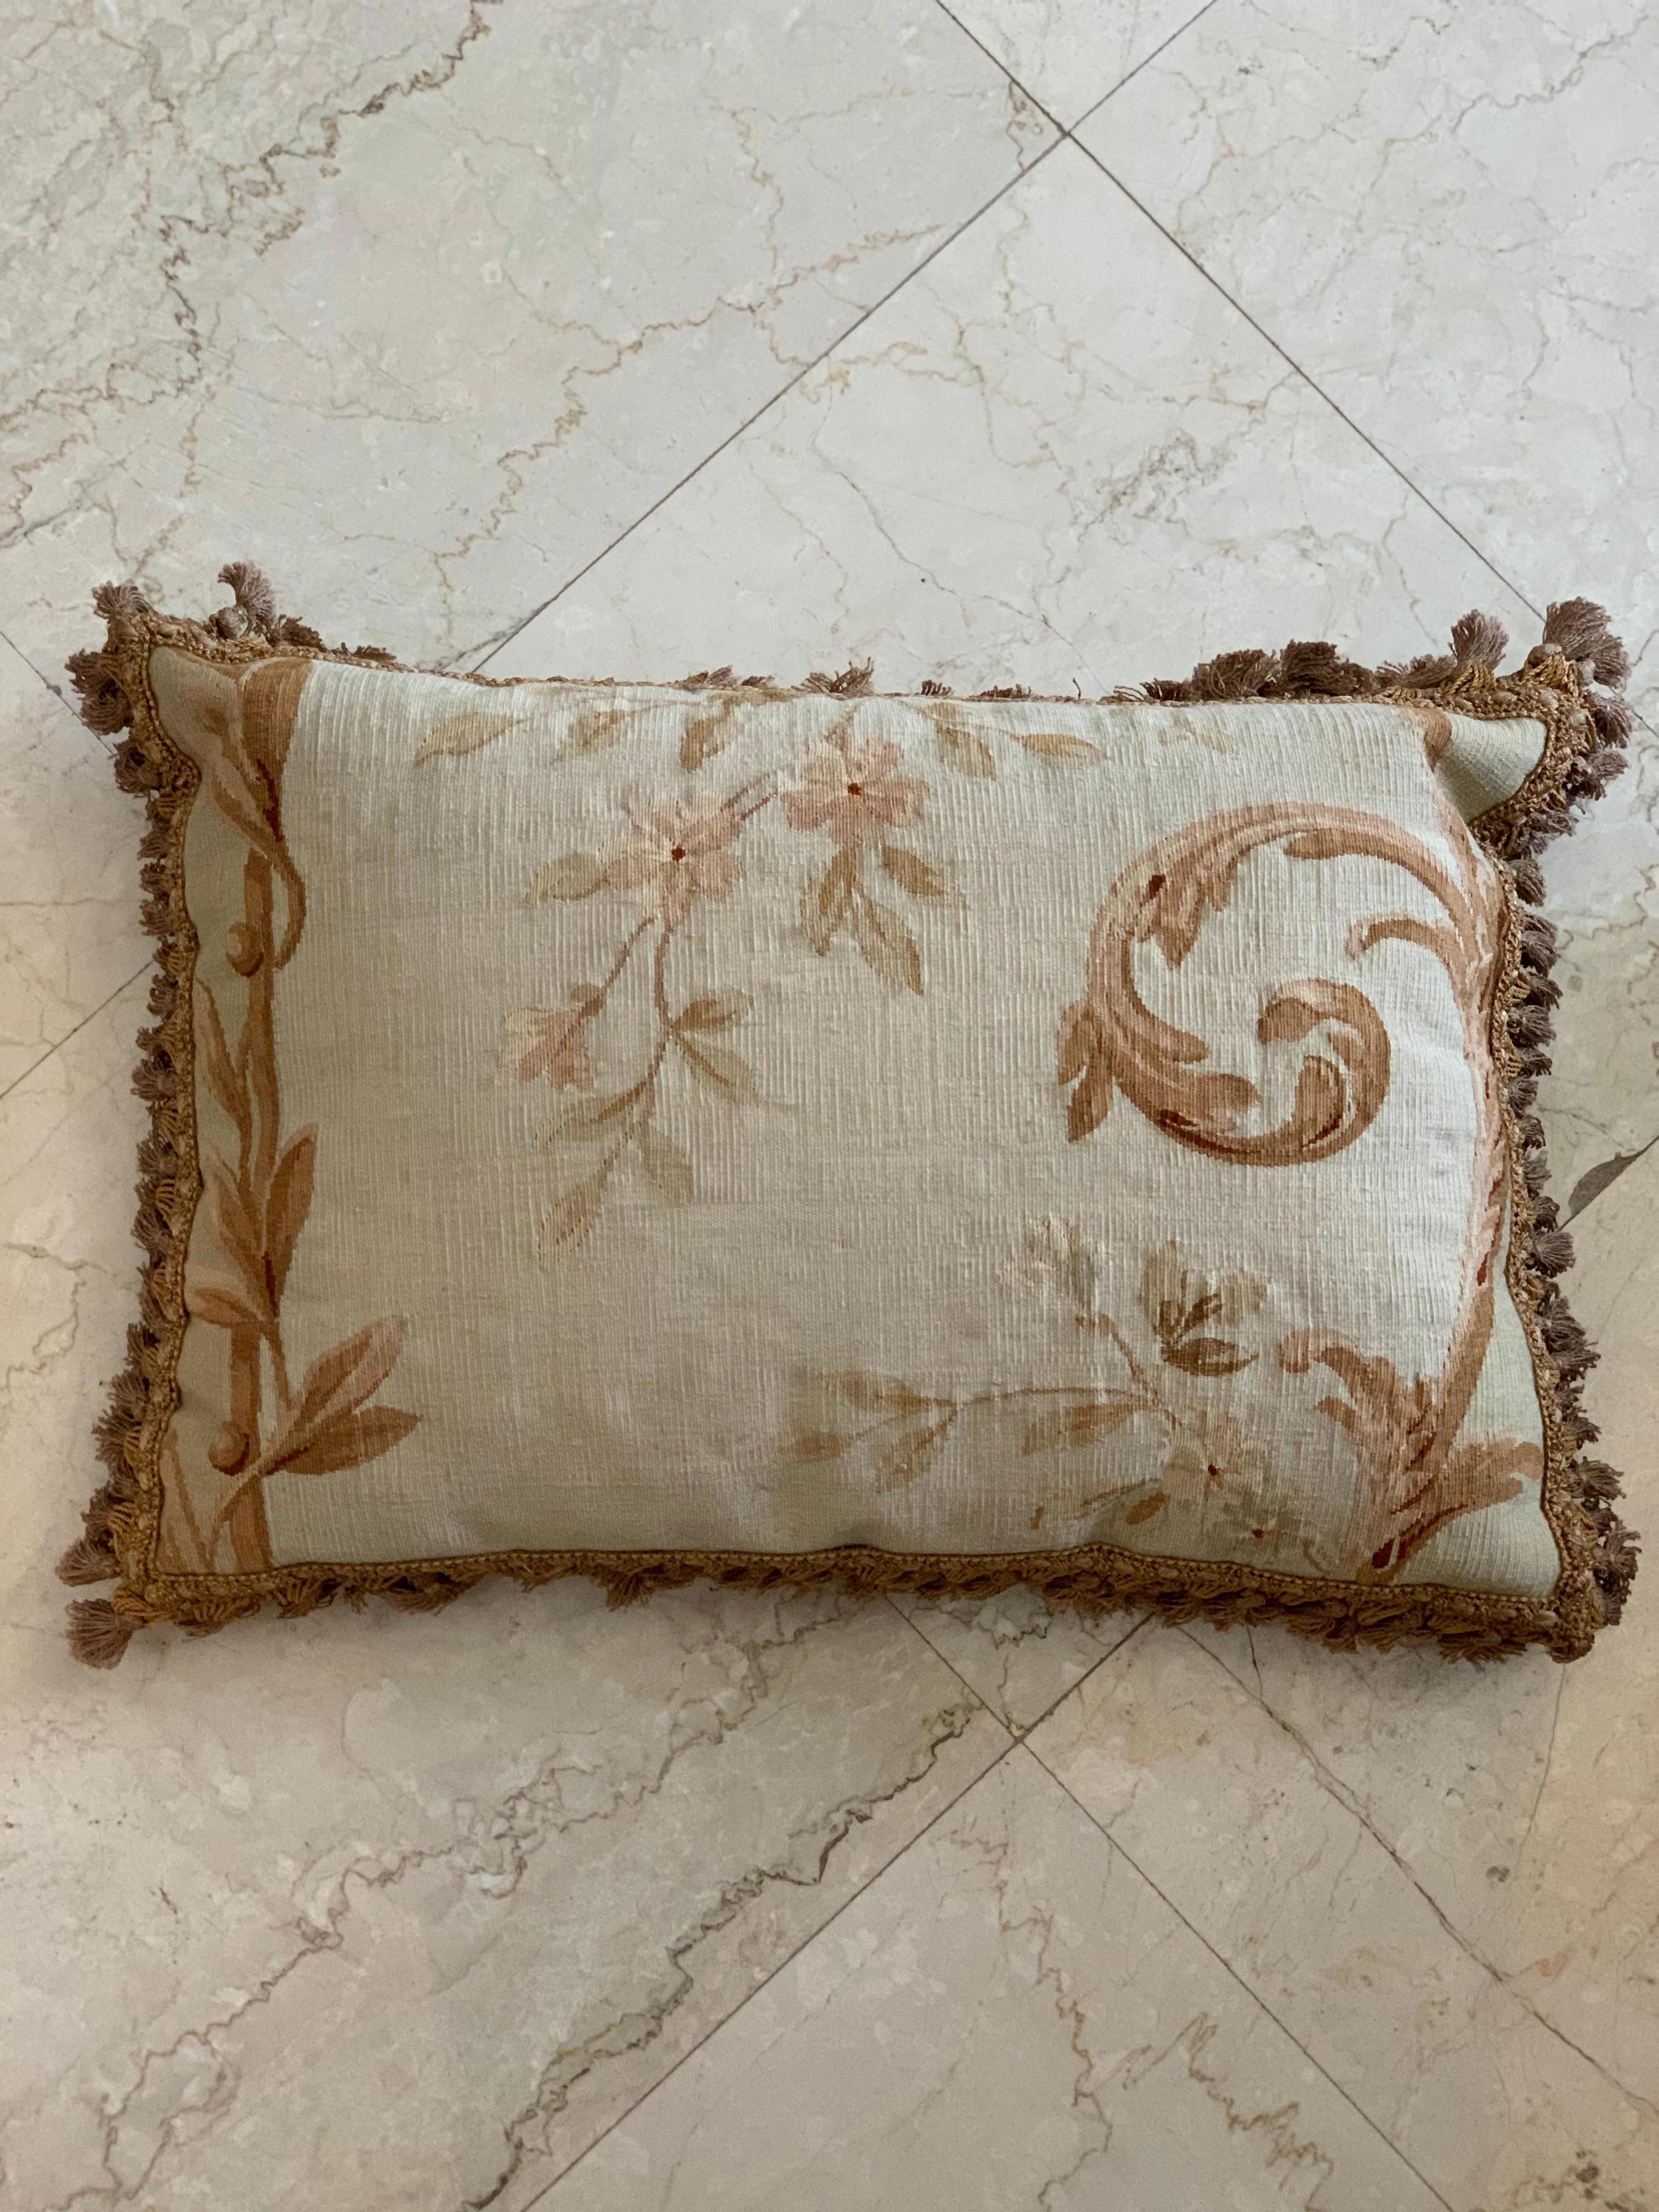 A pair of French Aubusson tapestry pillows from the 19th century, with foliage decor and petite tassels that will brighten up any sofa, canapé or settee! They are in excellent condition (one has a water stain on the backing) with gold backing and